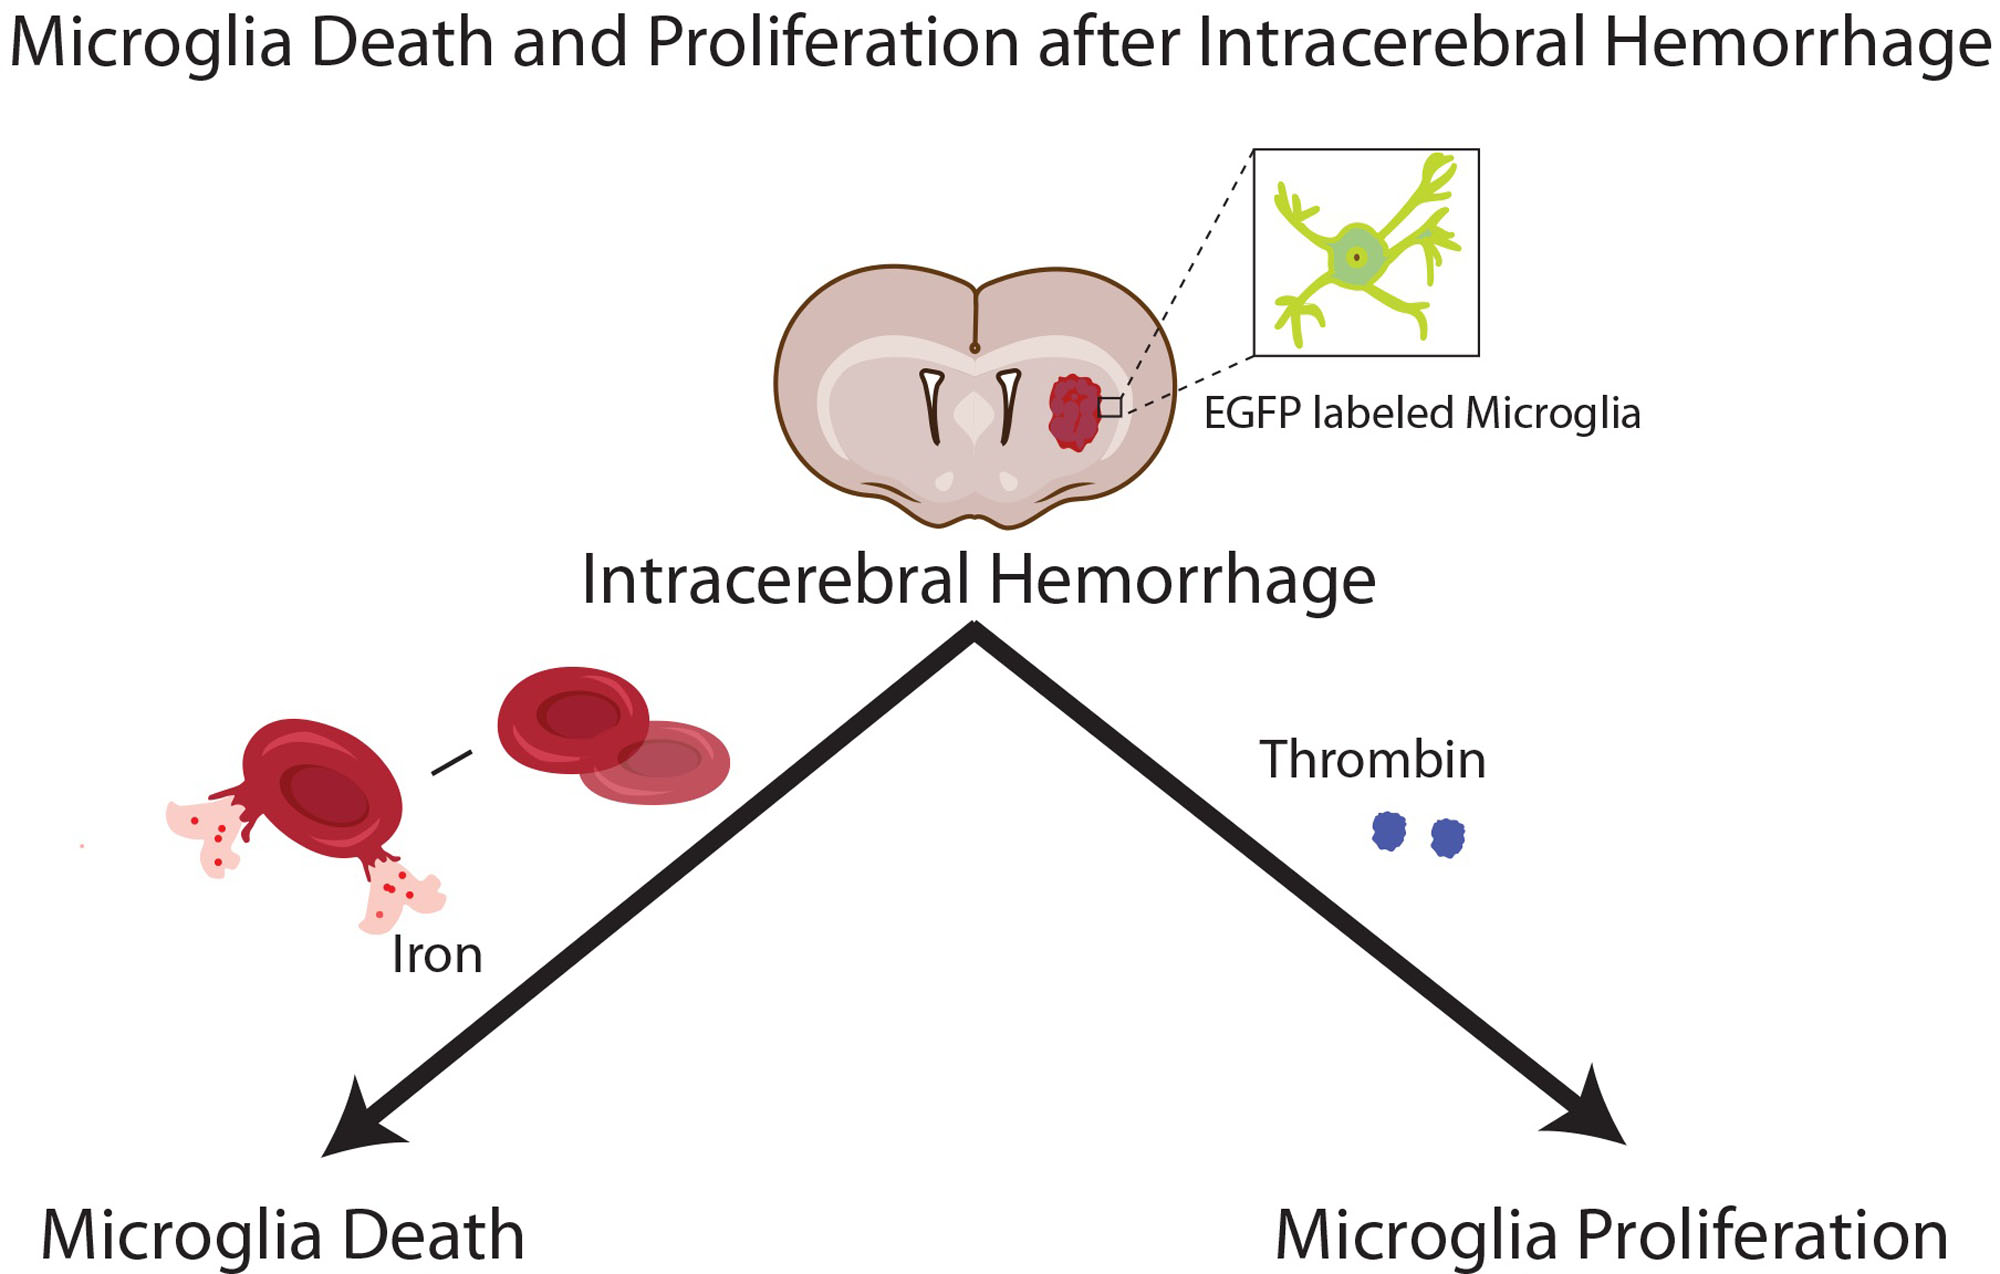 Novel Approach to Visualize Microglia Death and Proliferation After Intracerebral Hemorrhage in Mice